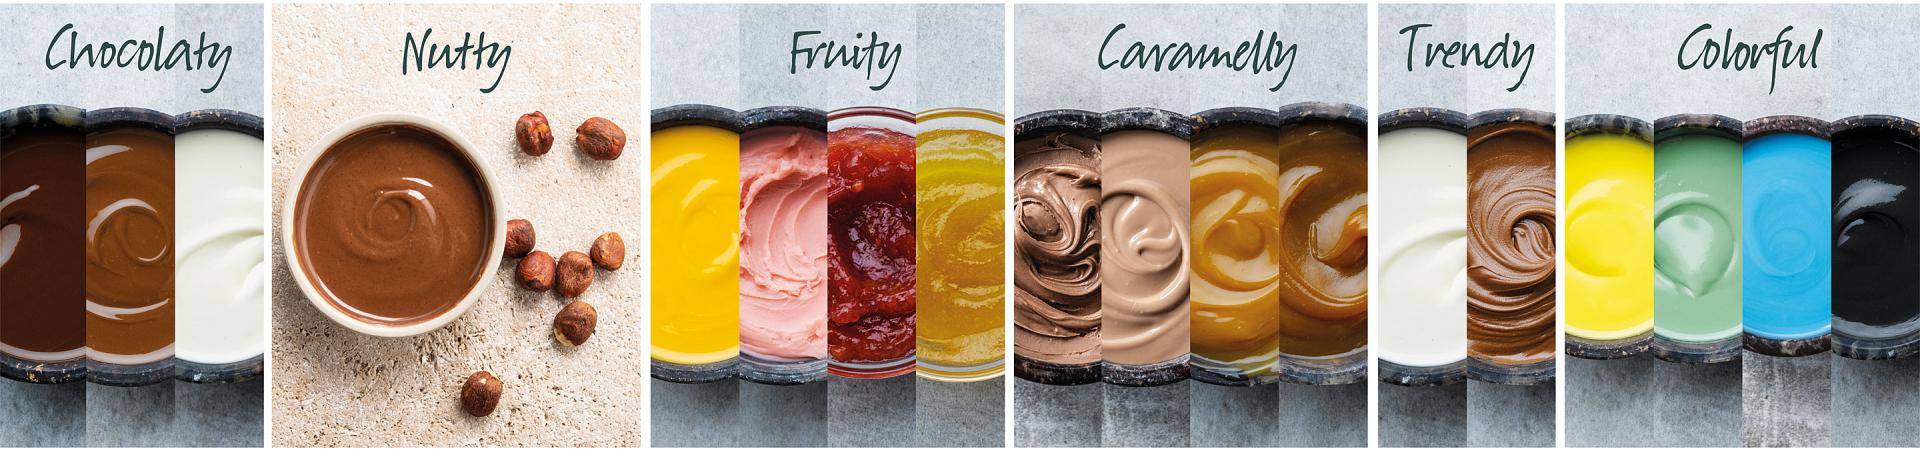 Ice cream fillings compound coatings